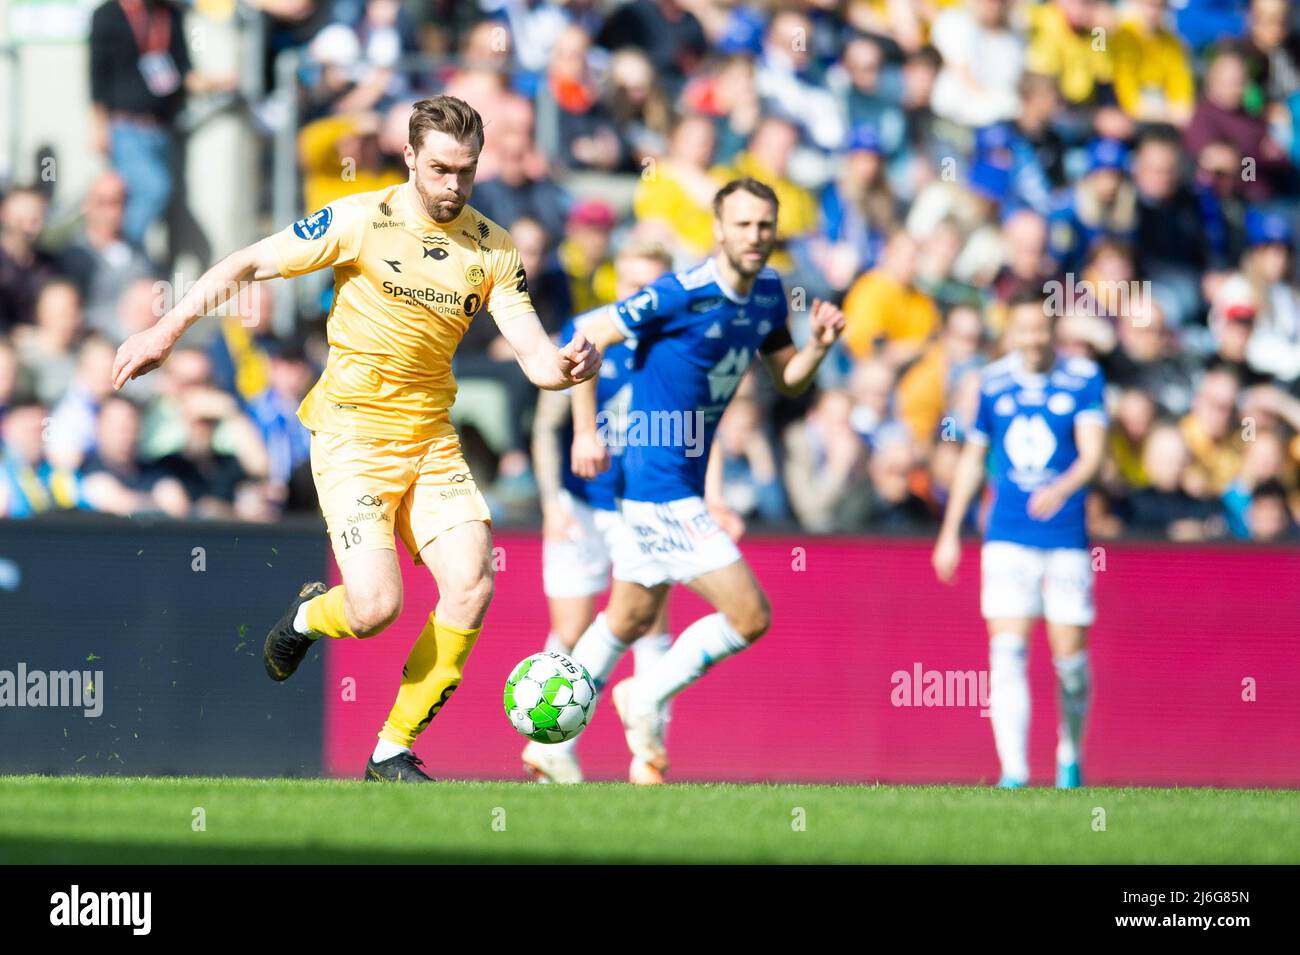 Oslo, Norway. 01st, May 2022. Brede Mathias Moe (18) of Bodoe/Glimt seen in the Norwegian Cup final, the NM Menn final, between Bodoe/Glimt and Molde at Ullevaal Stadion in Oslo. (Photo credit: Gonzales Photo - Jan-Erik Eriksen). Credit: Gonzales Photo/Alamy Live News Stock Photo